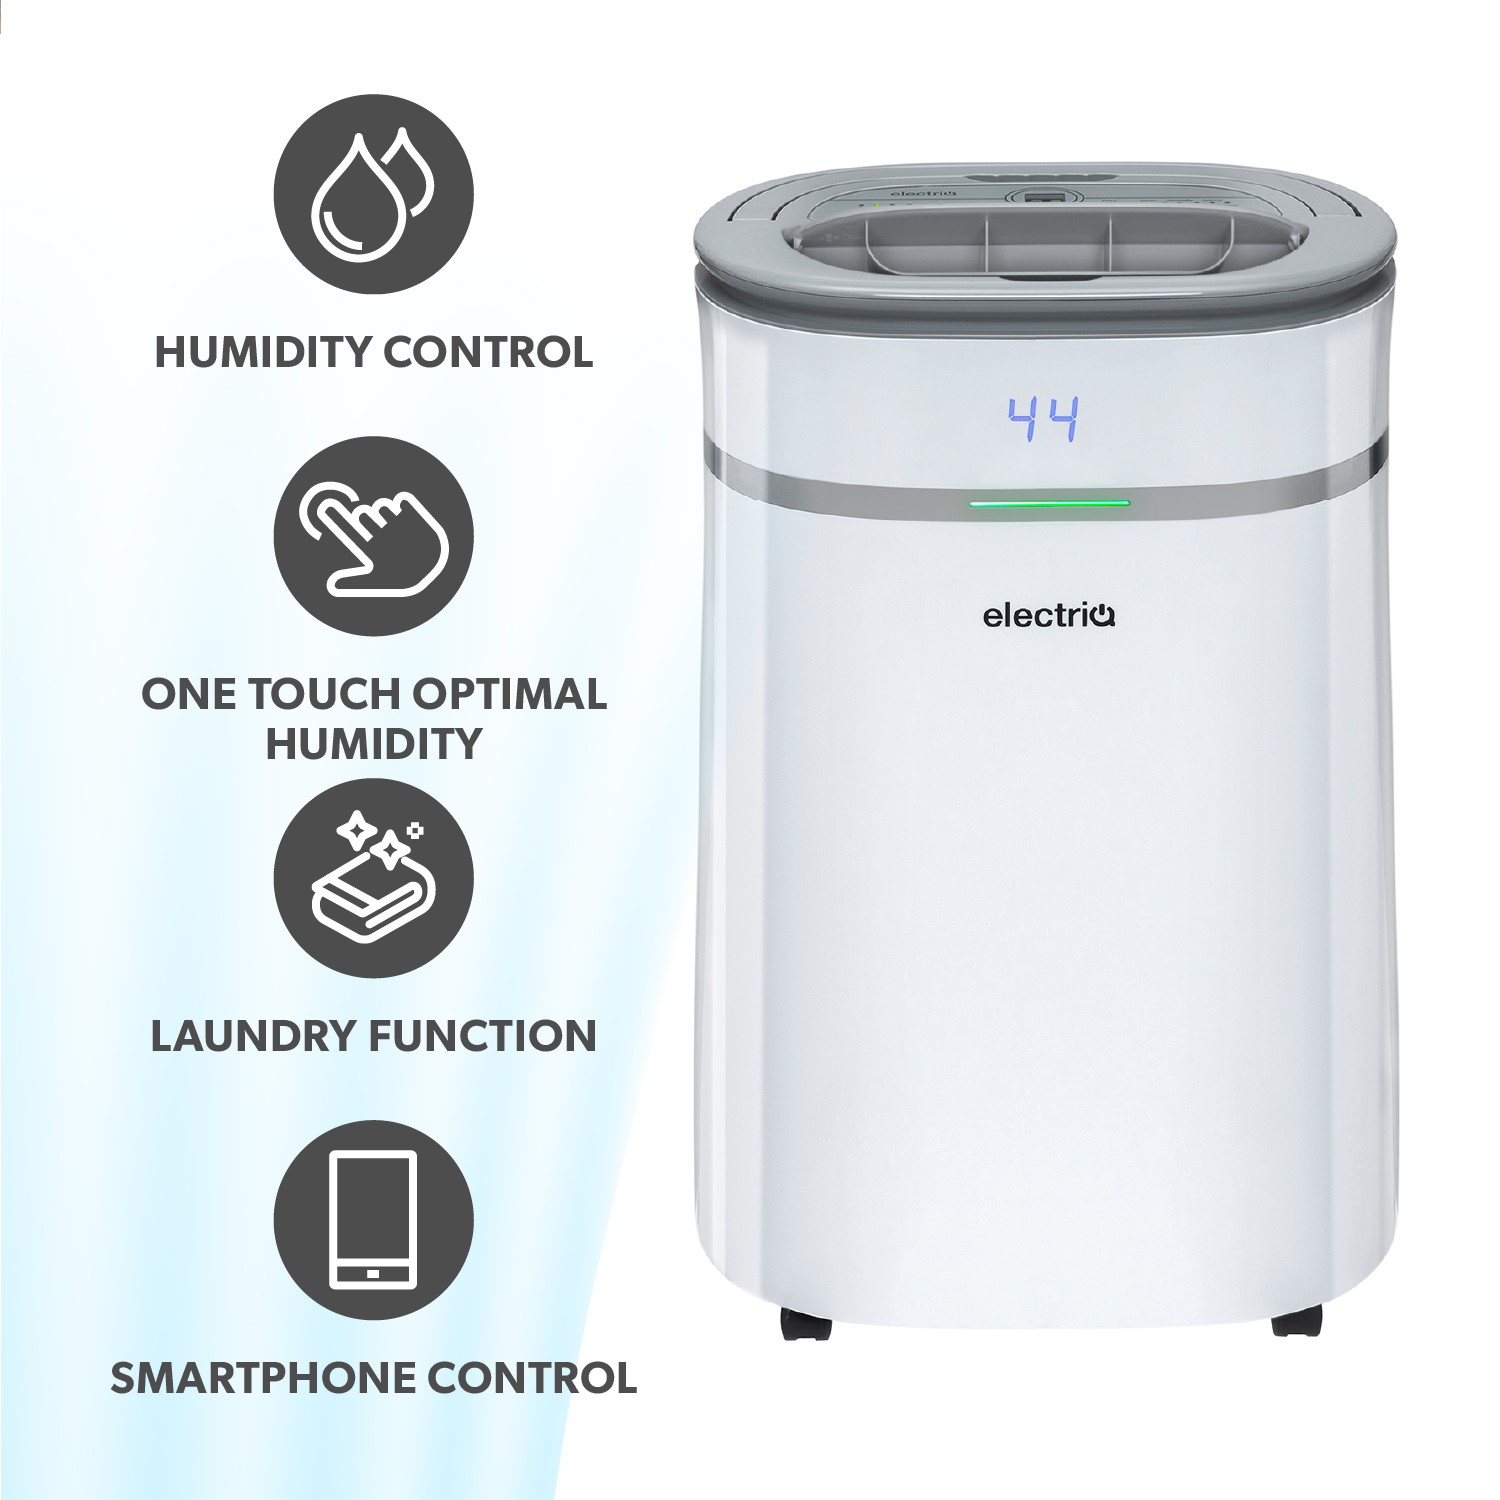 electriQ Low Energy 20L Dehumidifier Great for Homes 2-5 bedrooms in Size Fitted with Antibacterial Air Purifier Mould and Mildew in The Home Condensation and Features a Laundry Mode. for Damp 